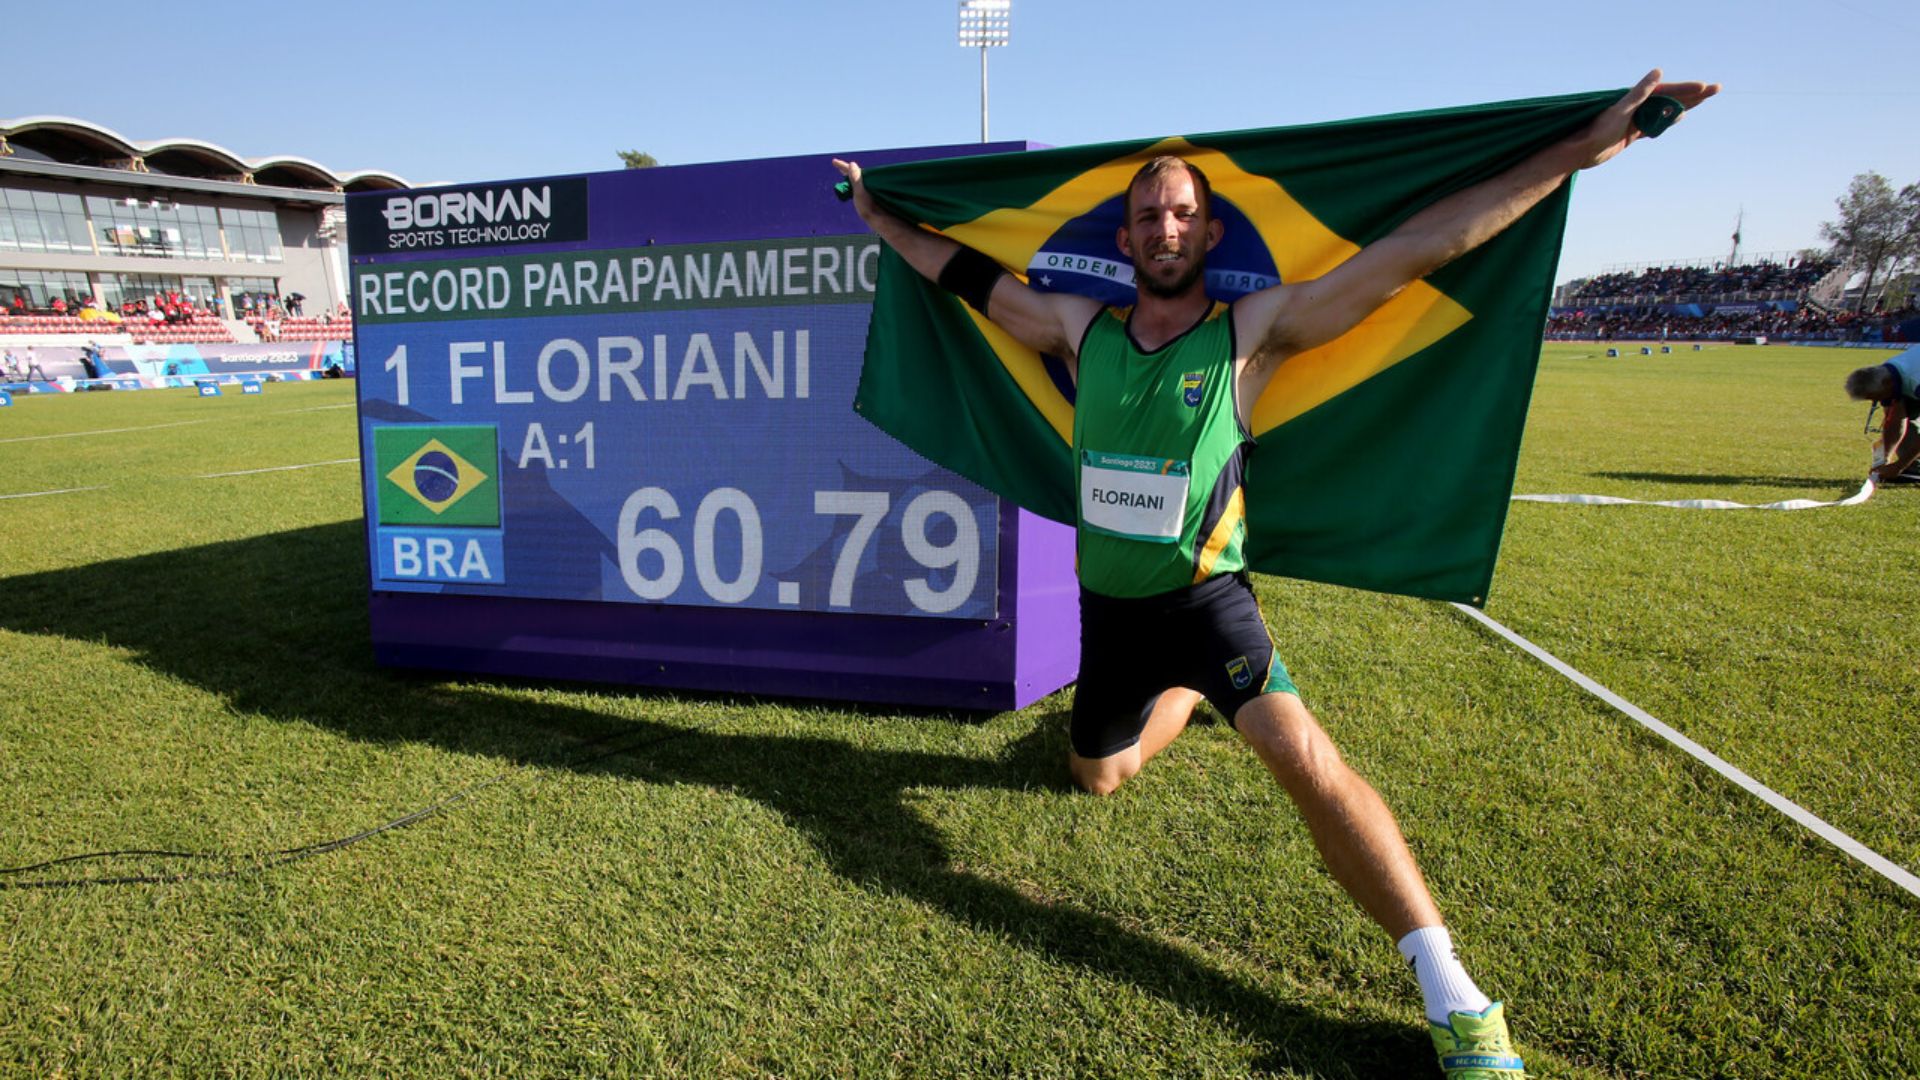 Brazil Achieves New Parapan American Record in F64 Javelin Throw